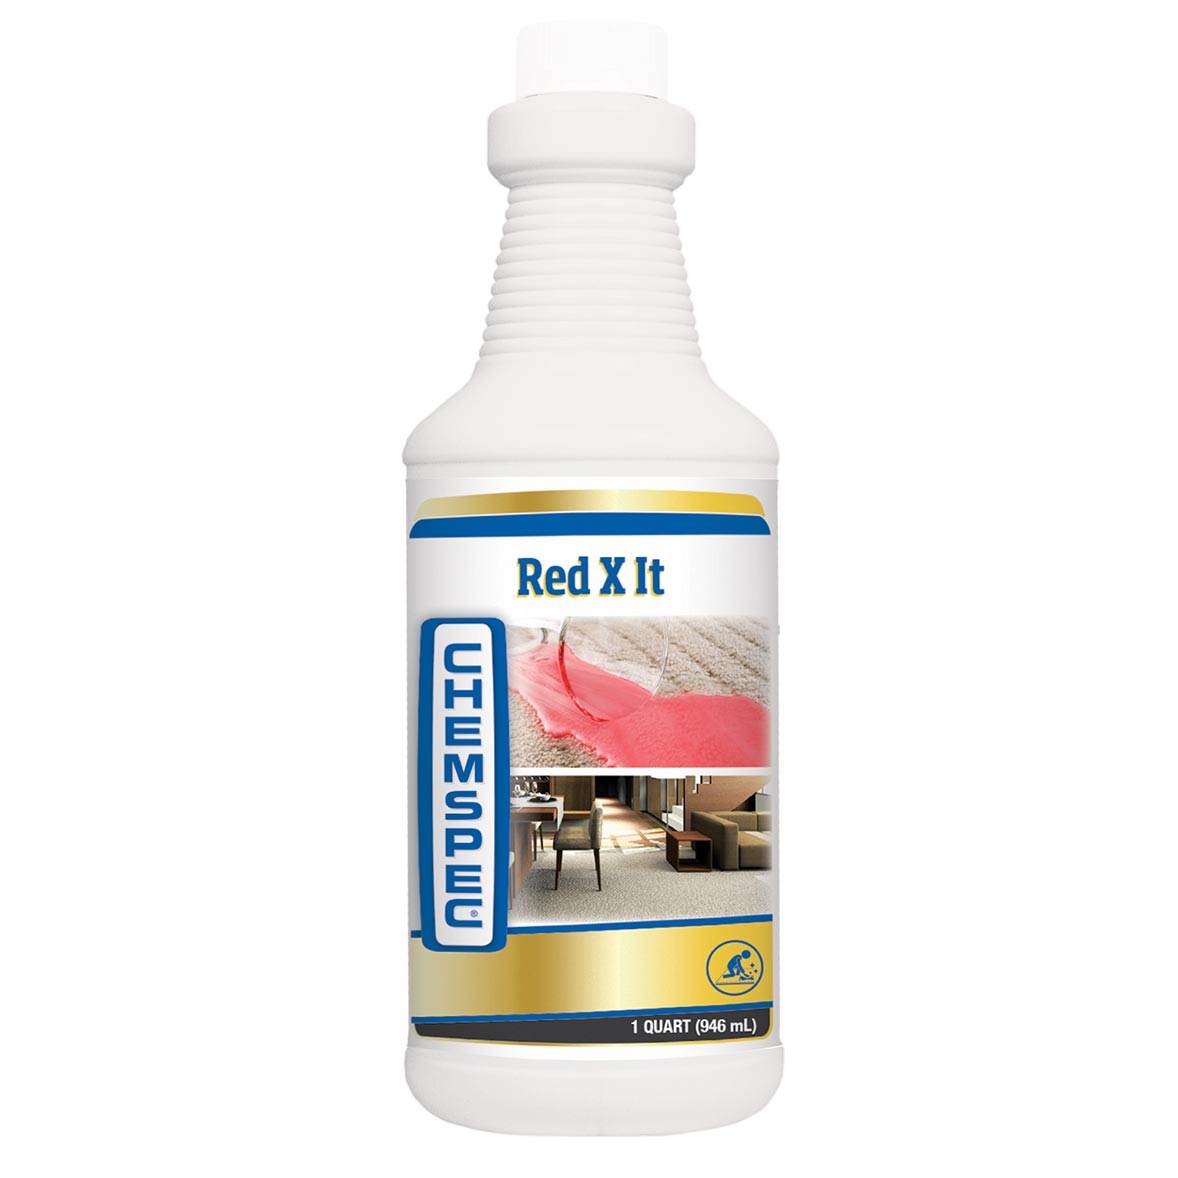 Chemspec RED X IT Sapphire Scientific 76-310 RedXit Red Stain Remover (1 Quart) UPC 847136000920